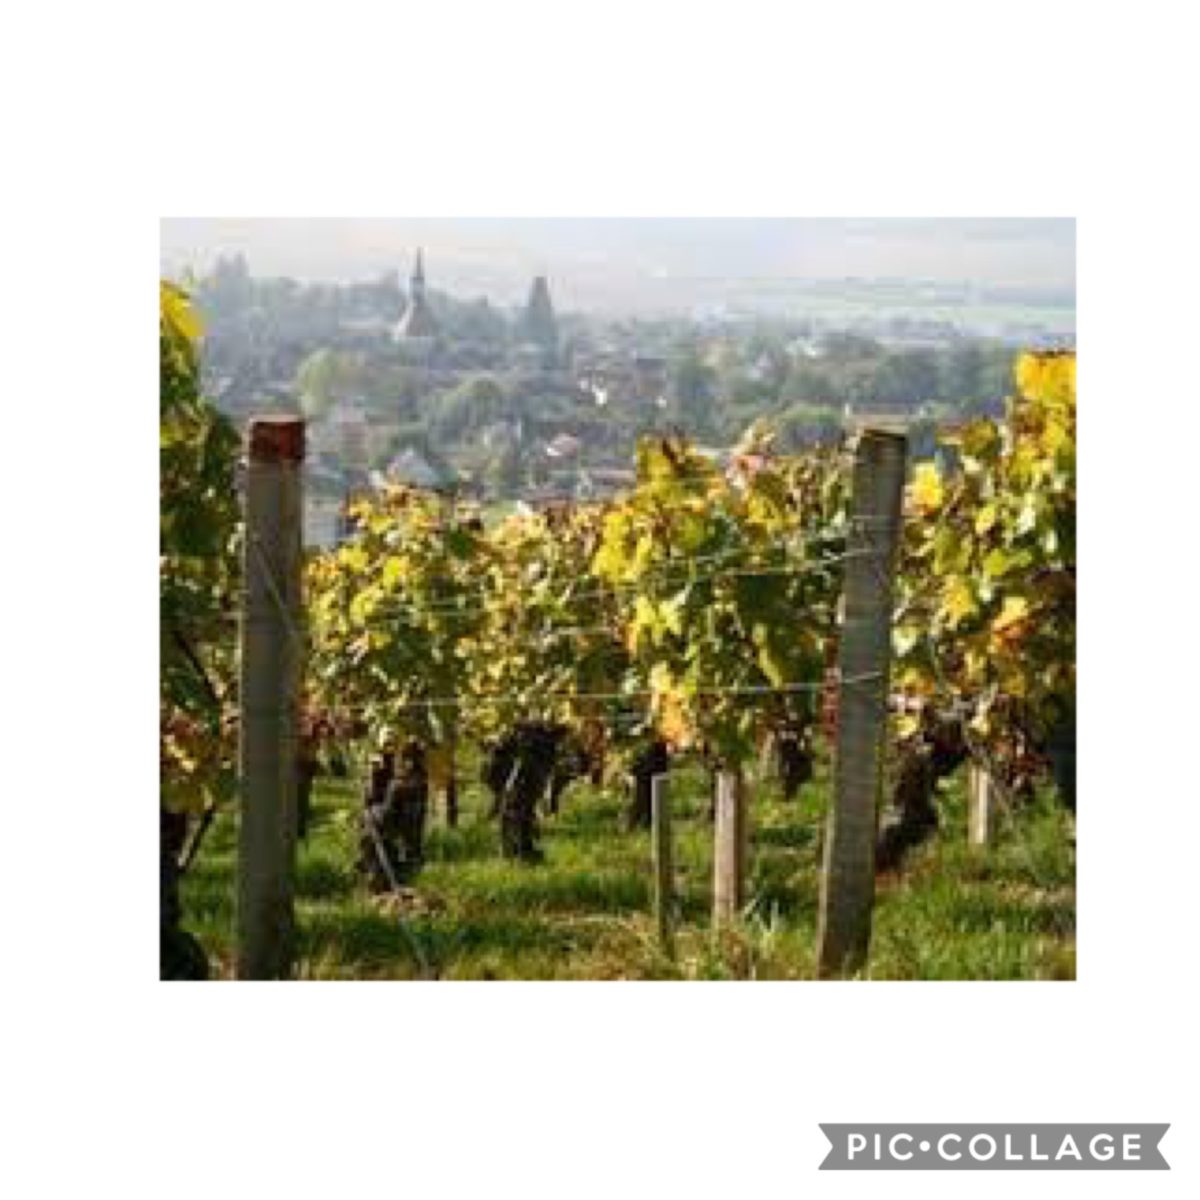 Chablis Invests €4.8M in innovative methanation system for winegrowers